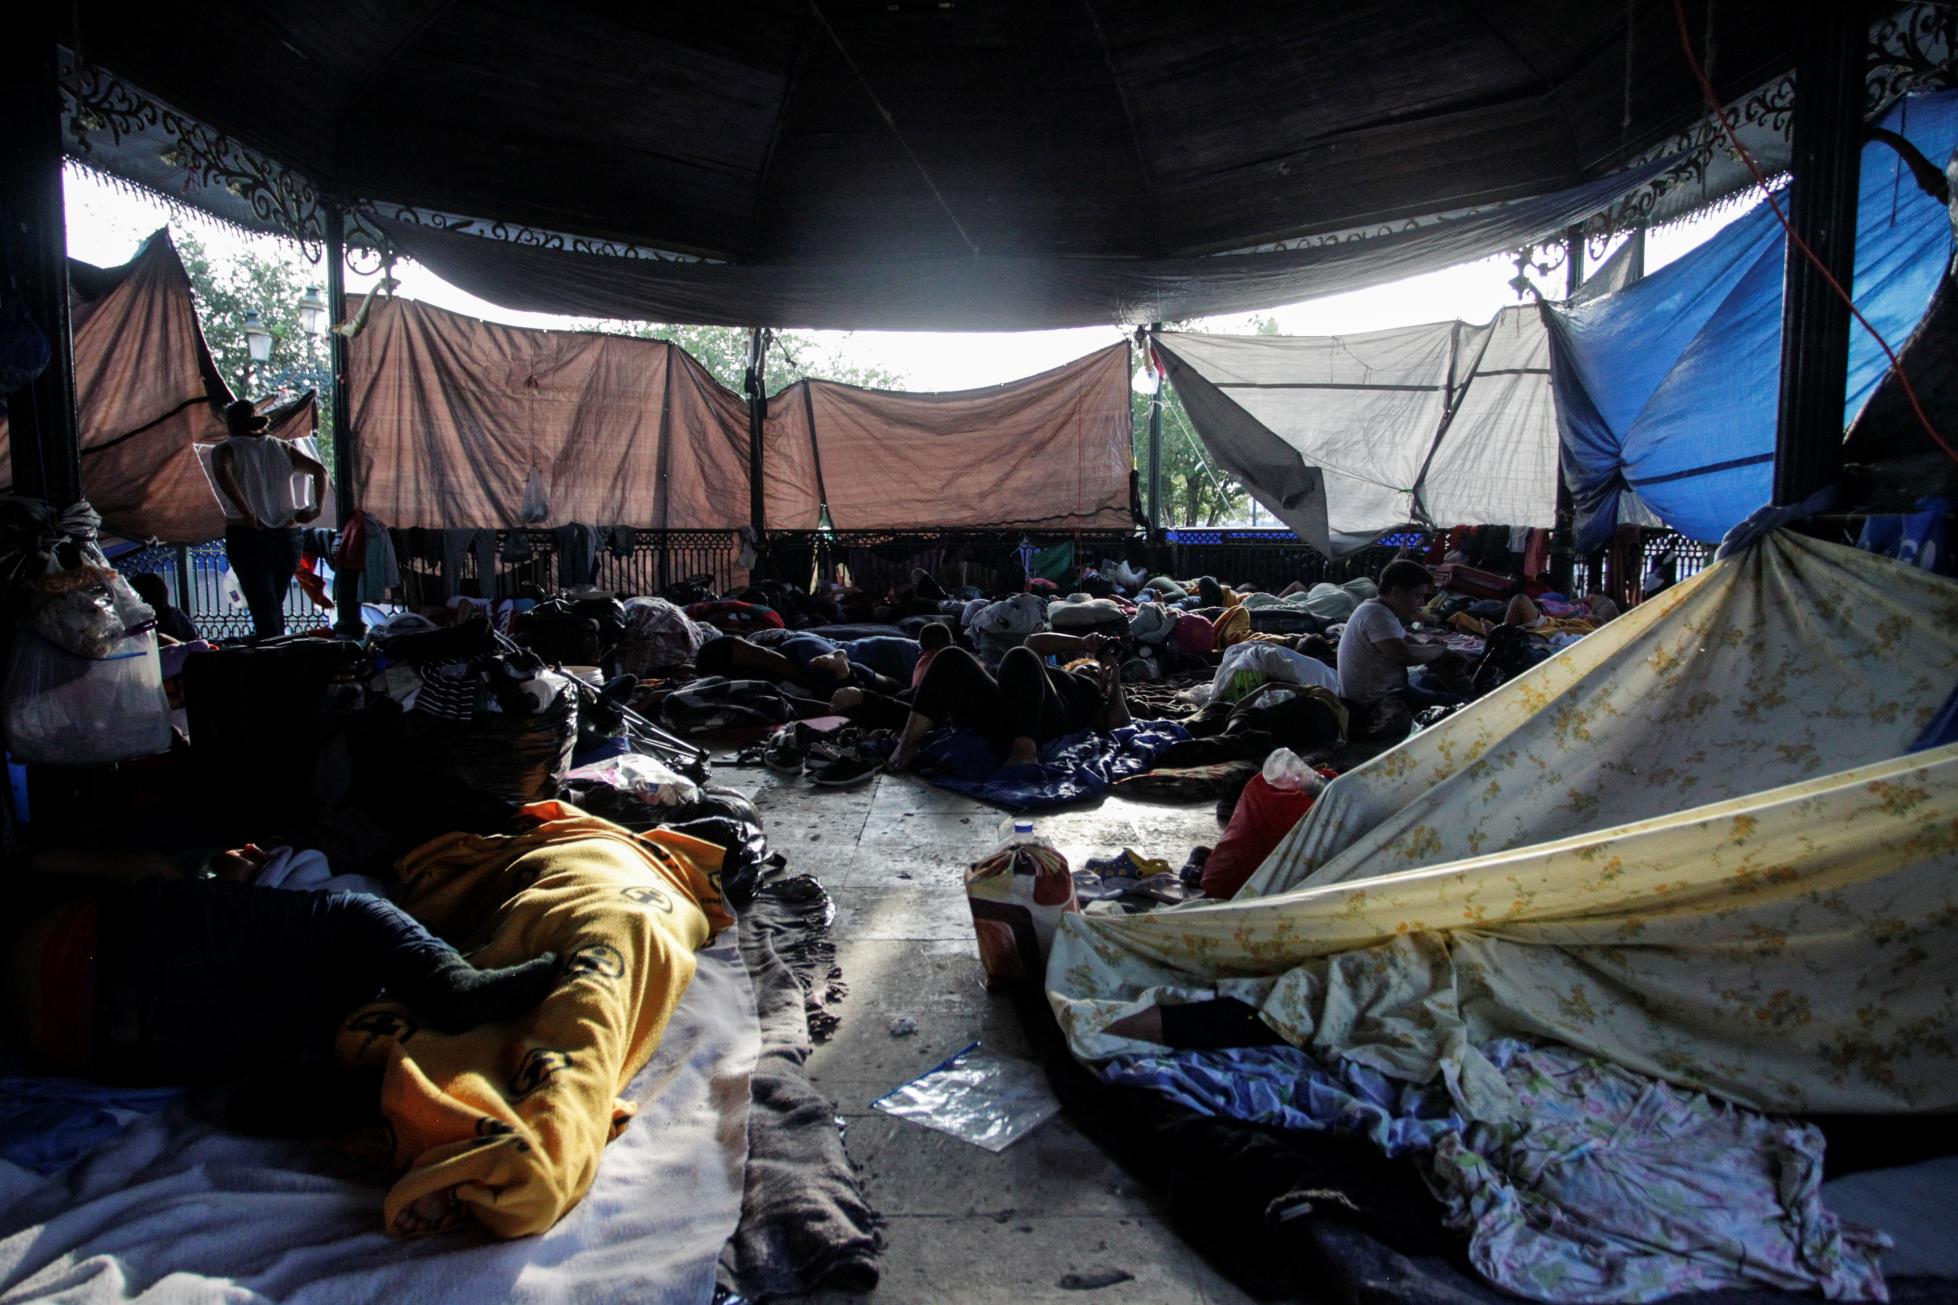 Asylum-seeking migrants, who were apprehended and returned to Mexico under Title 42 after crossing the border from Mexico into the U.S., rest in a public square wher<em></em>e hundreds of migrants live in tents, in Reynosa, Mexico June 10, 2021. Picture taken June 10, 2021. REUTERS/Daniel Becerril